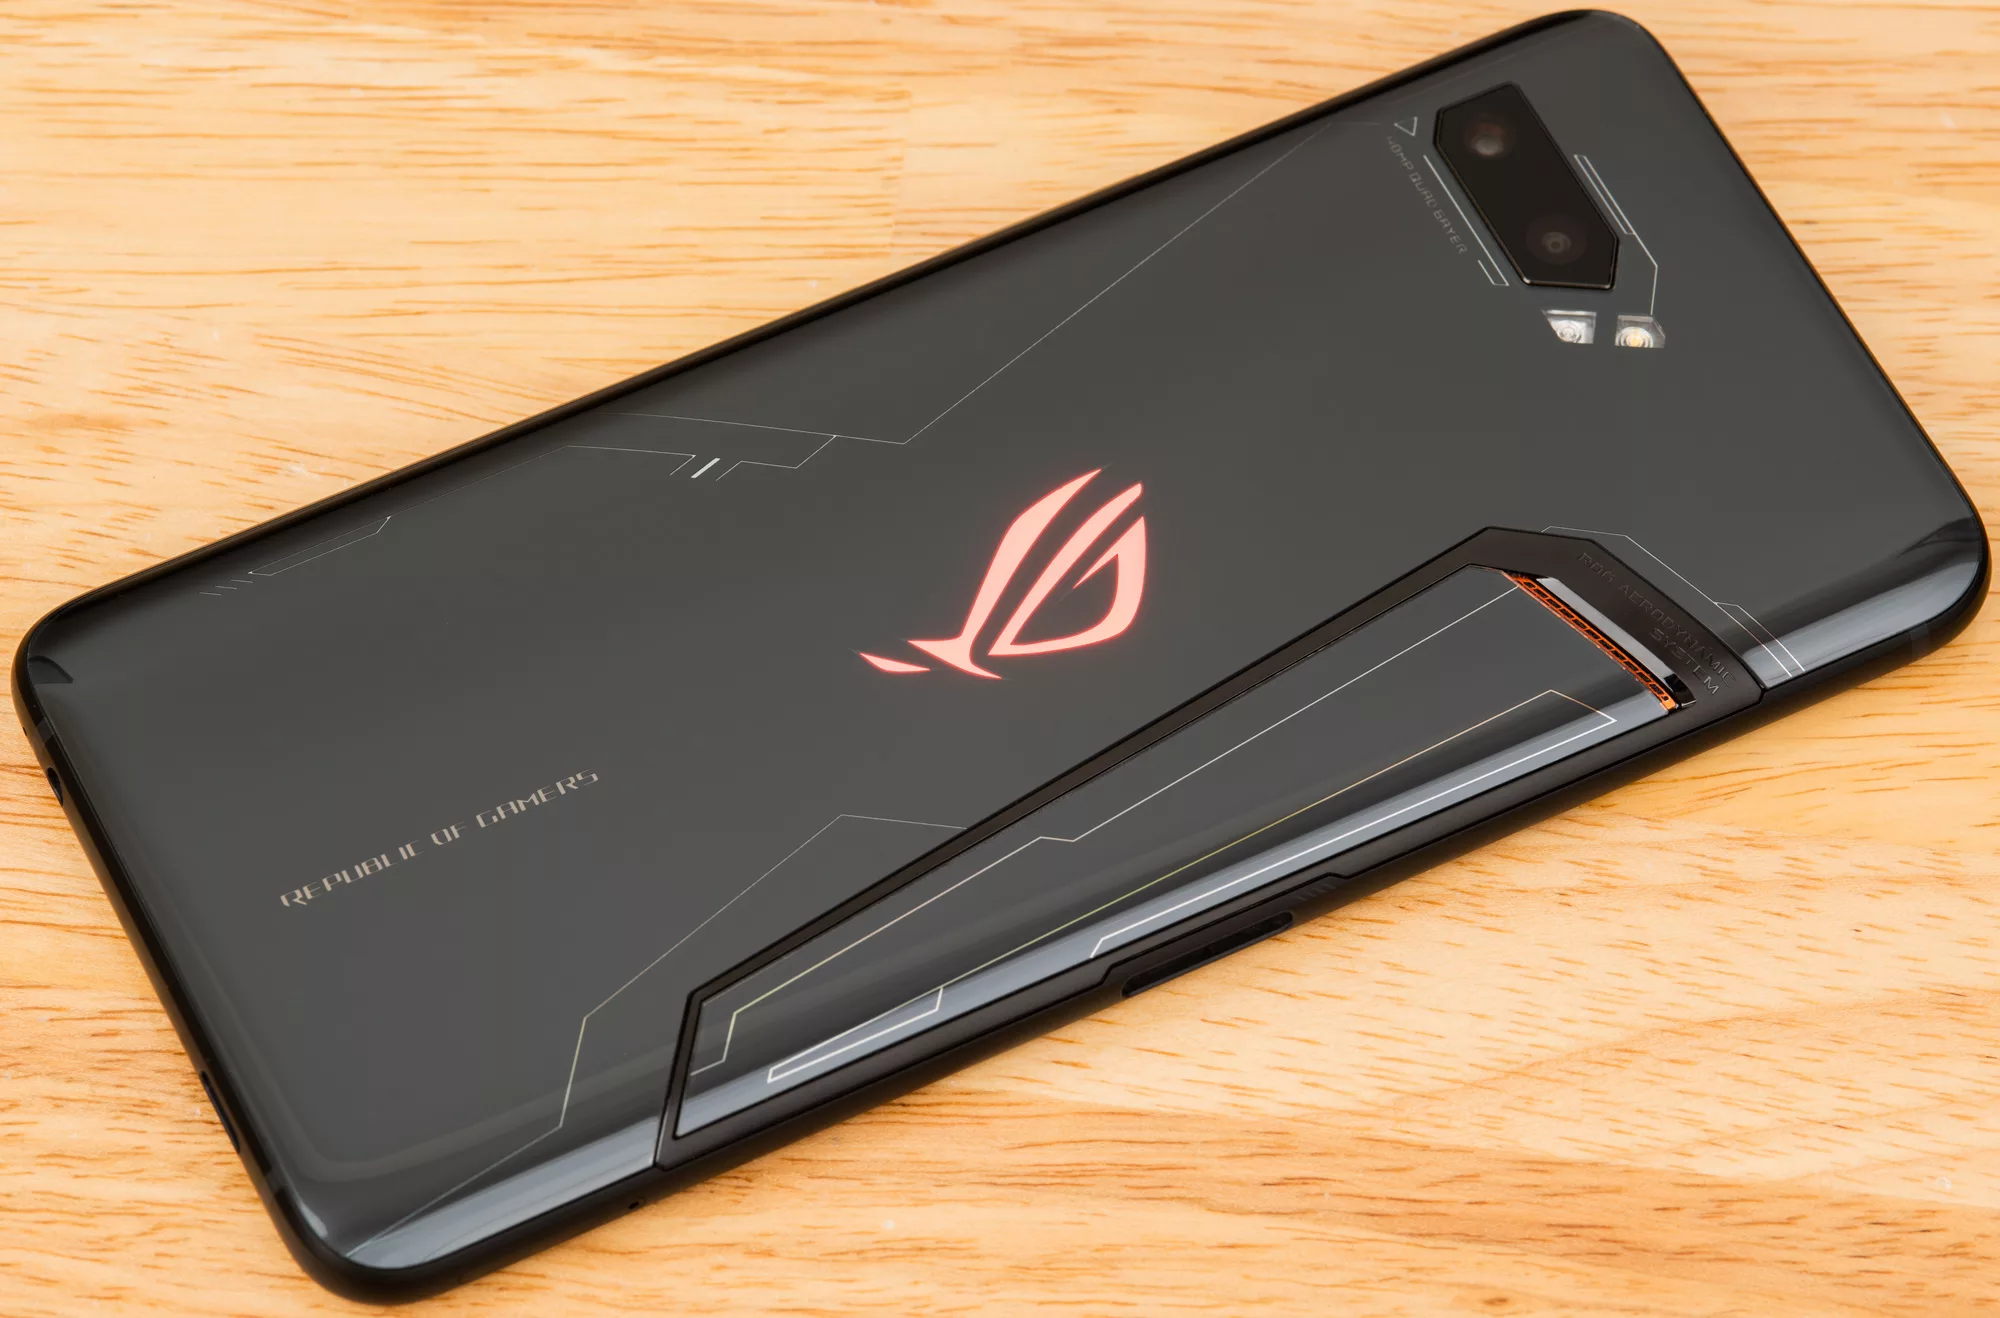 Kalksten bro Kanon The ROG Phone II delivers gaming superiority anywhere, anytime | ROG -  Republic of Gamers Global